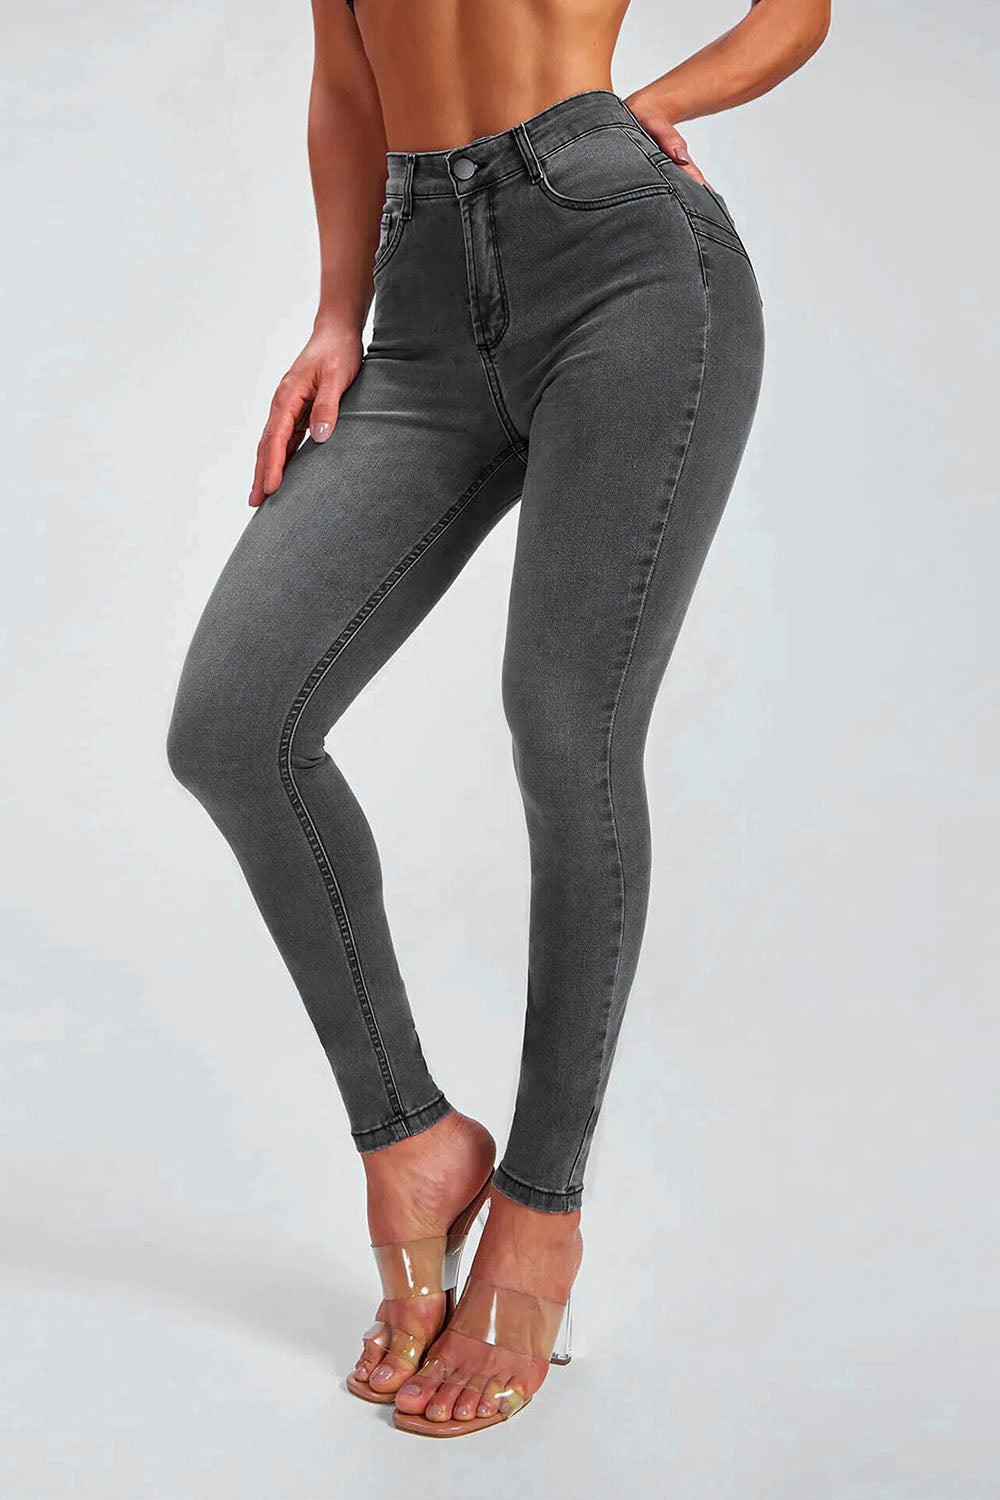 Buttoned Skinny Jeans - Black / S - Bottoms - Pants - 1 - 2024